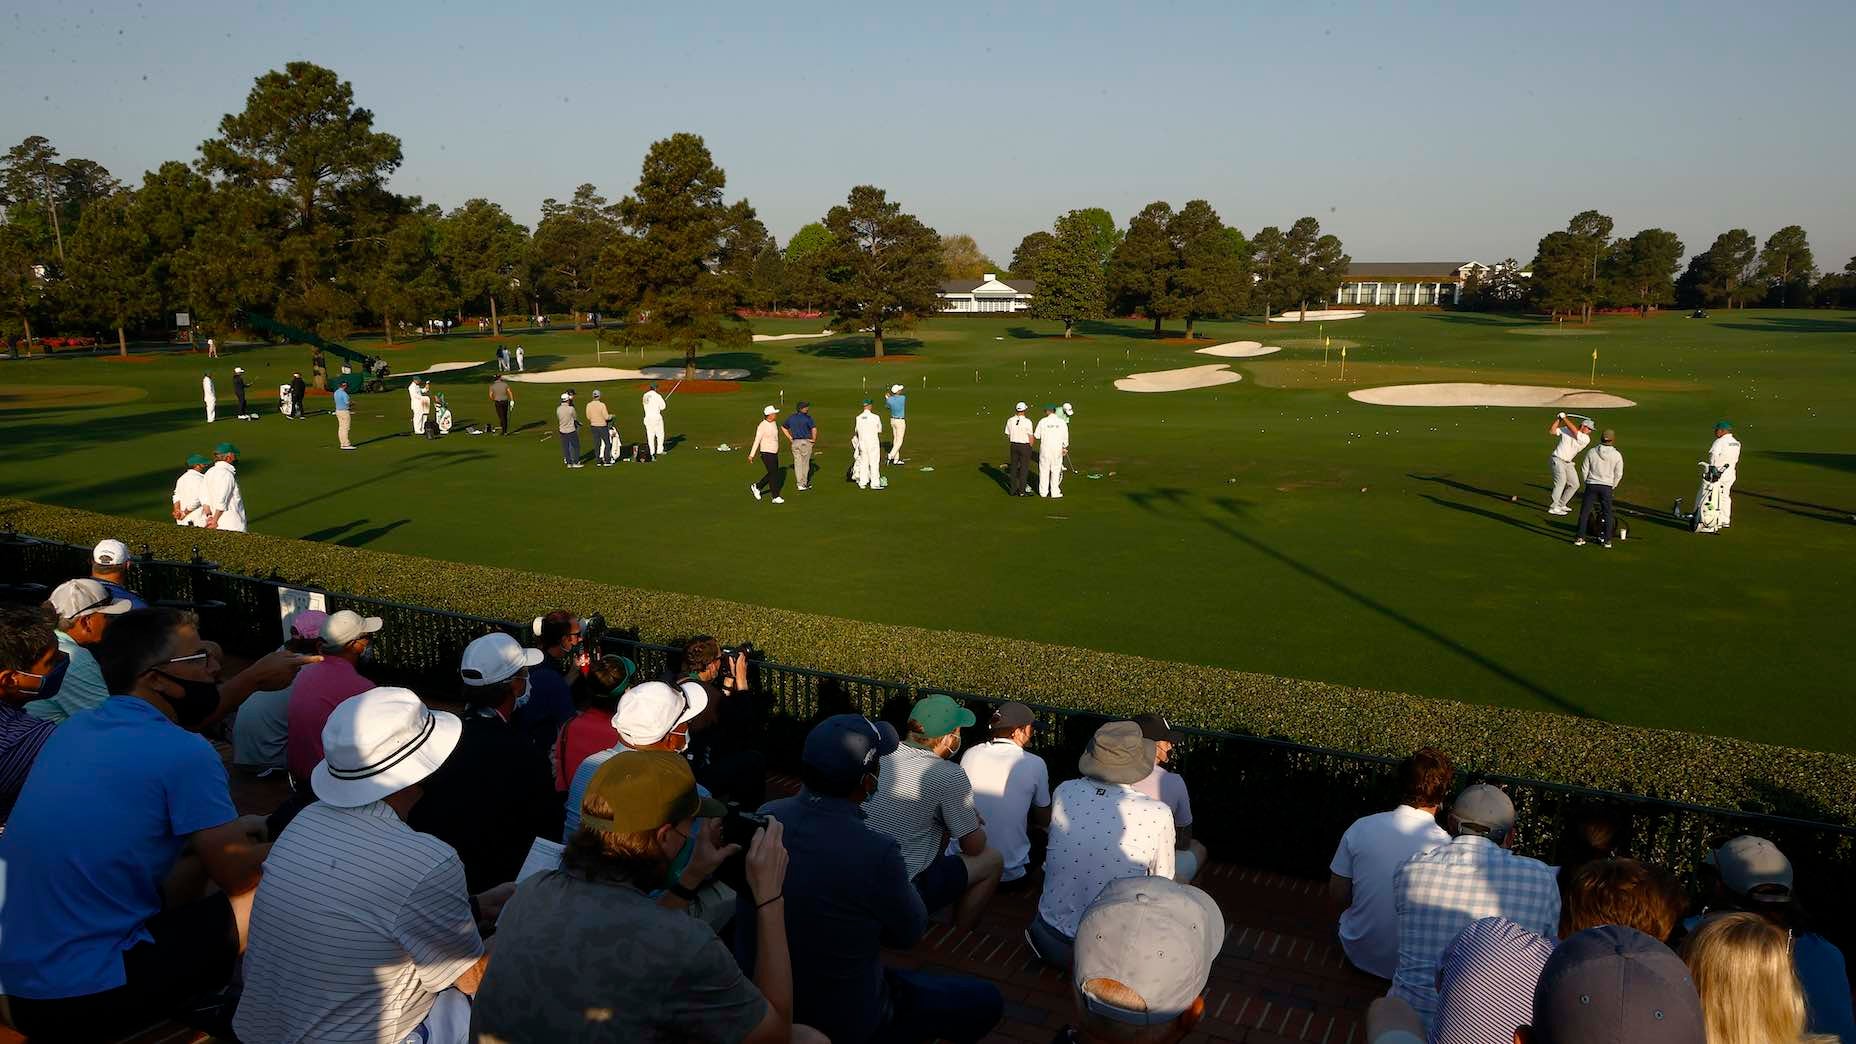 Up close, Augusta National's driving range reveals more than you'd think